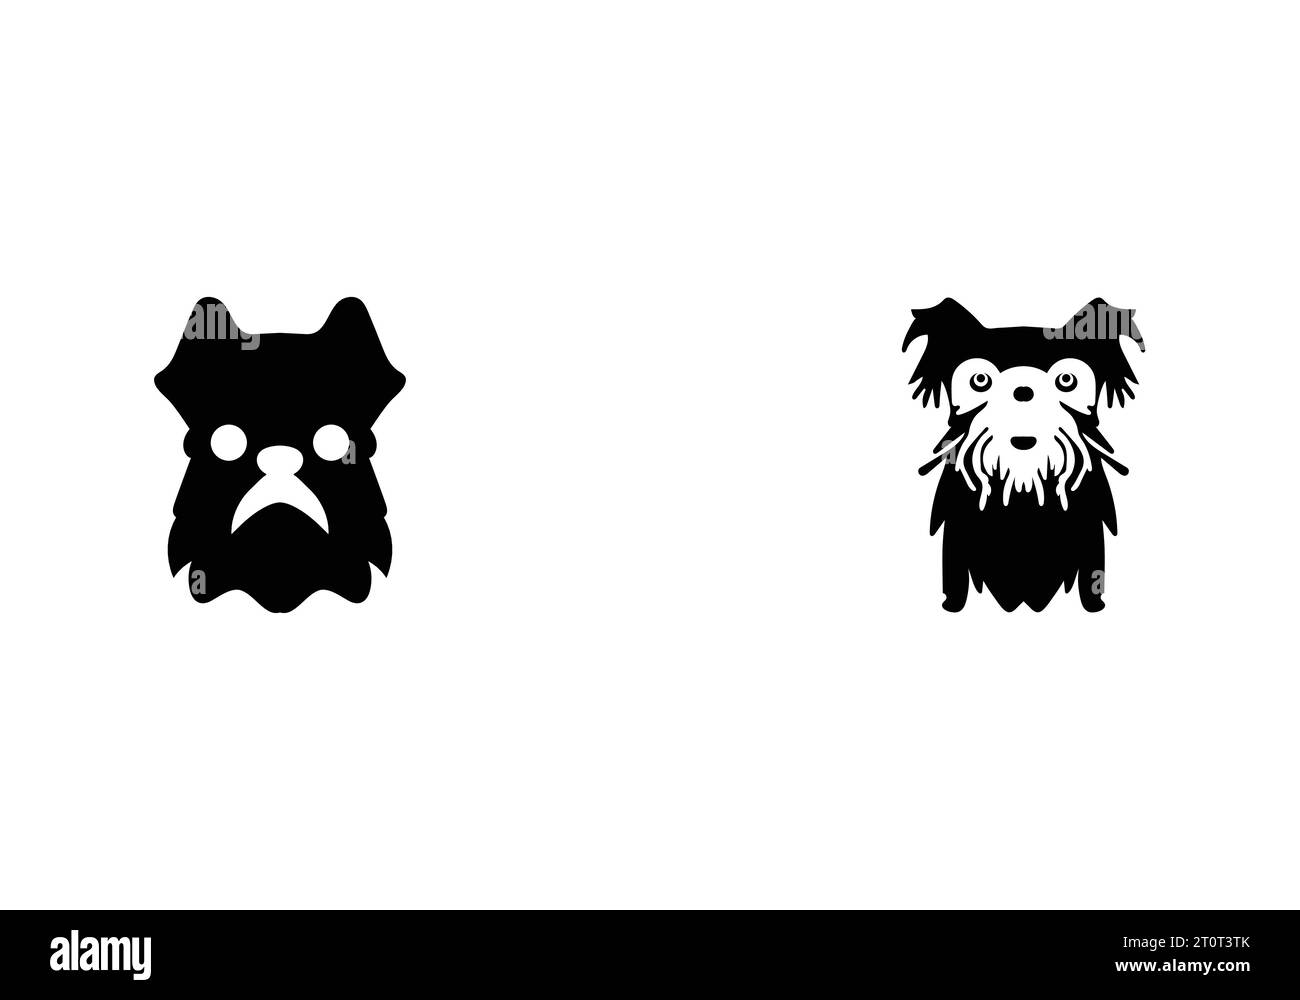 New unique minimal style Brussels Griffon icon illustration- Stock Vector